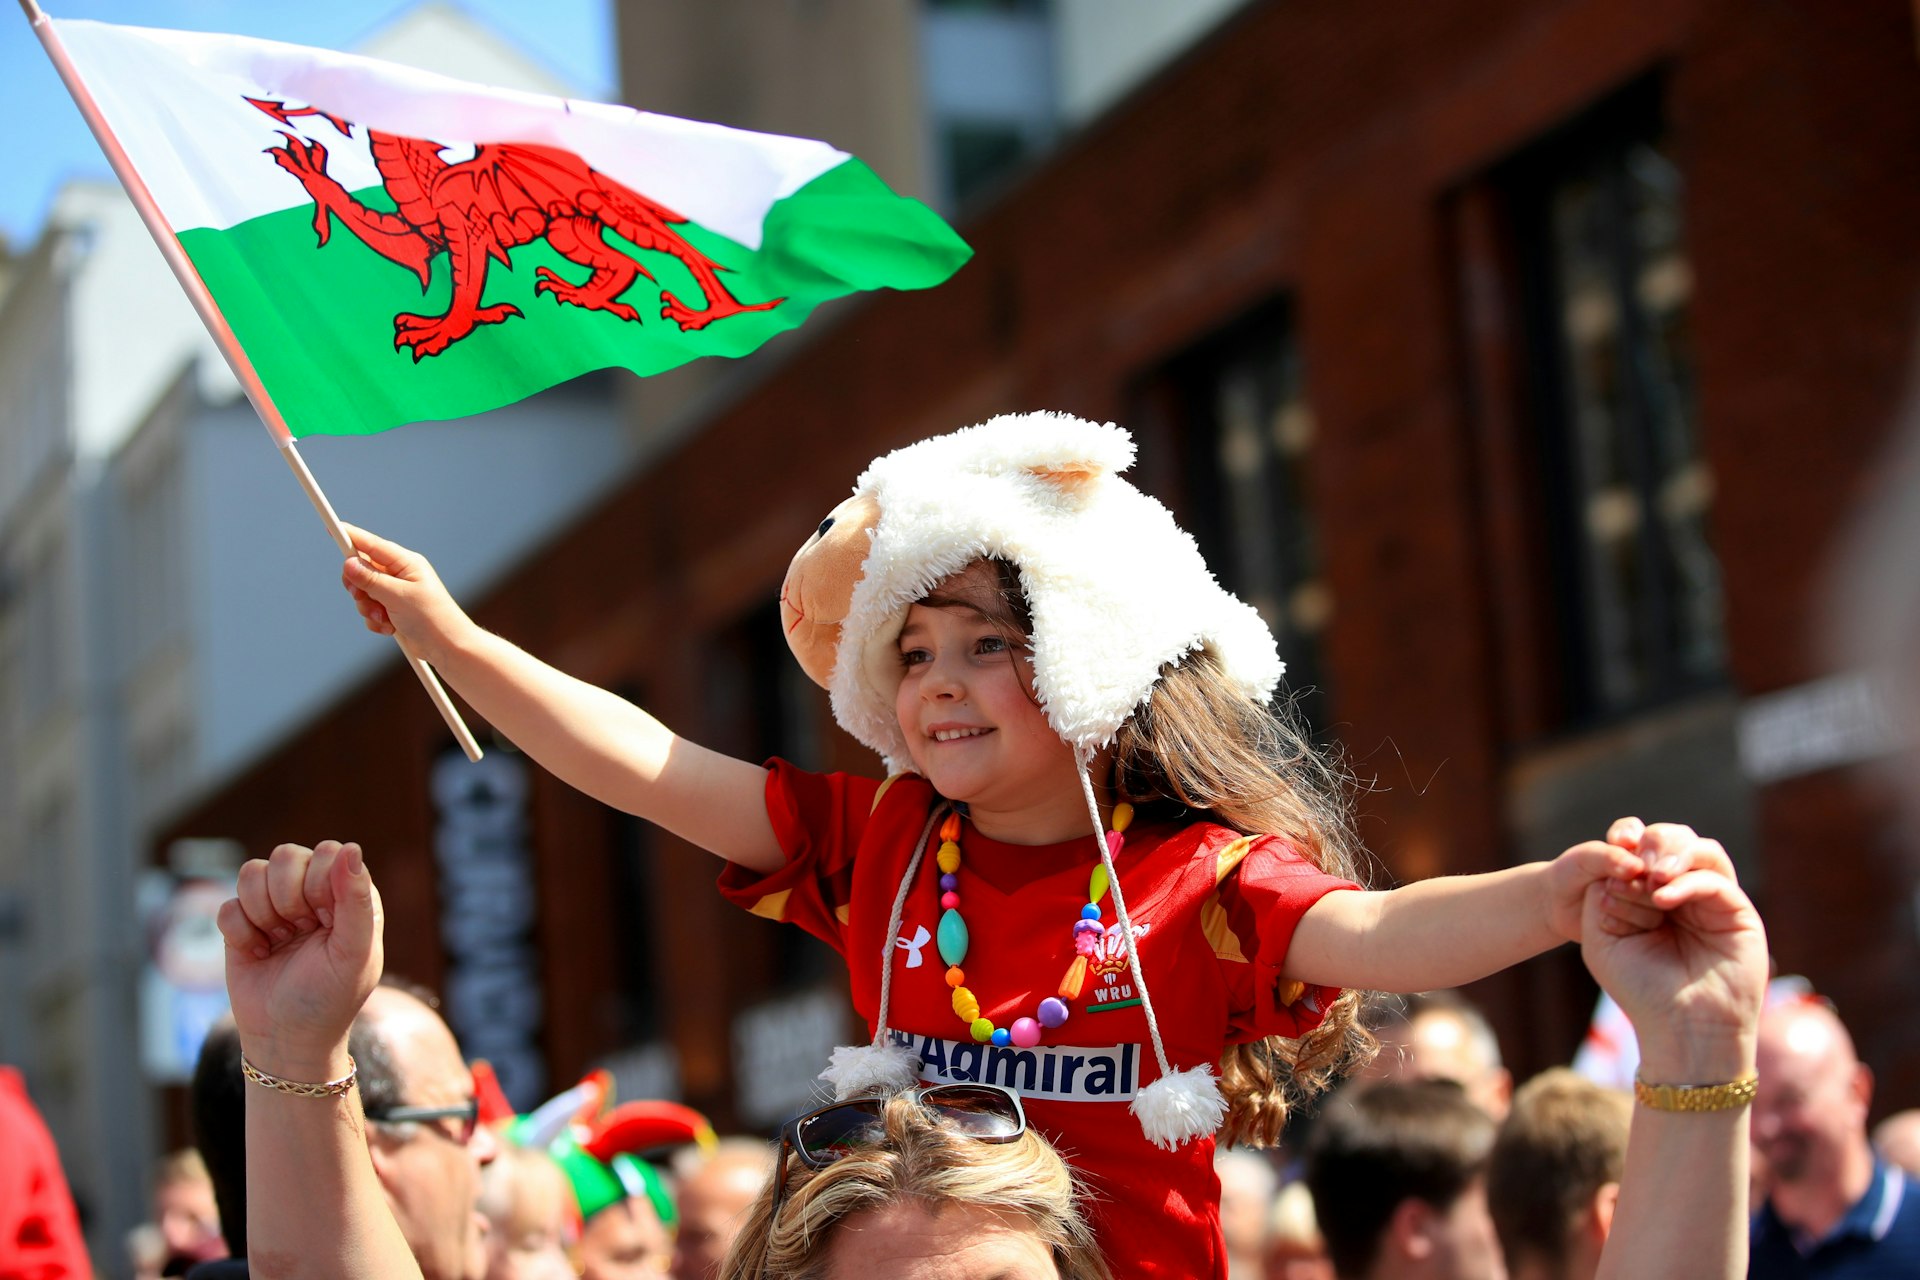 A young rugby fan, sporting a red Wales jersey and waving a Welsh flag, is carried on an adult's shoulders on a sunny day in Cardiff